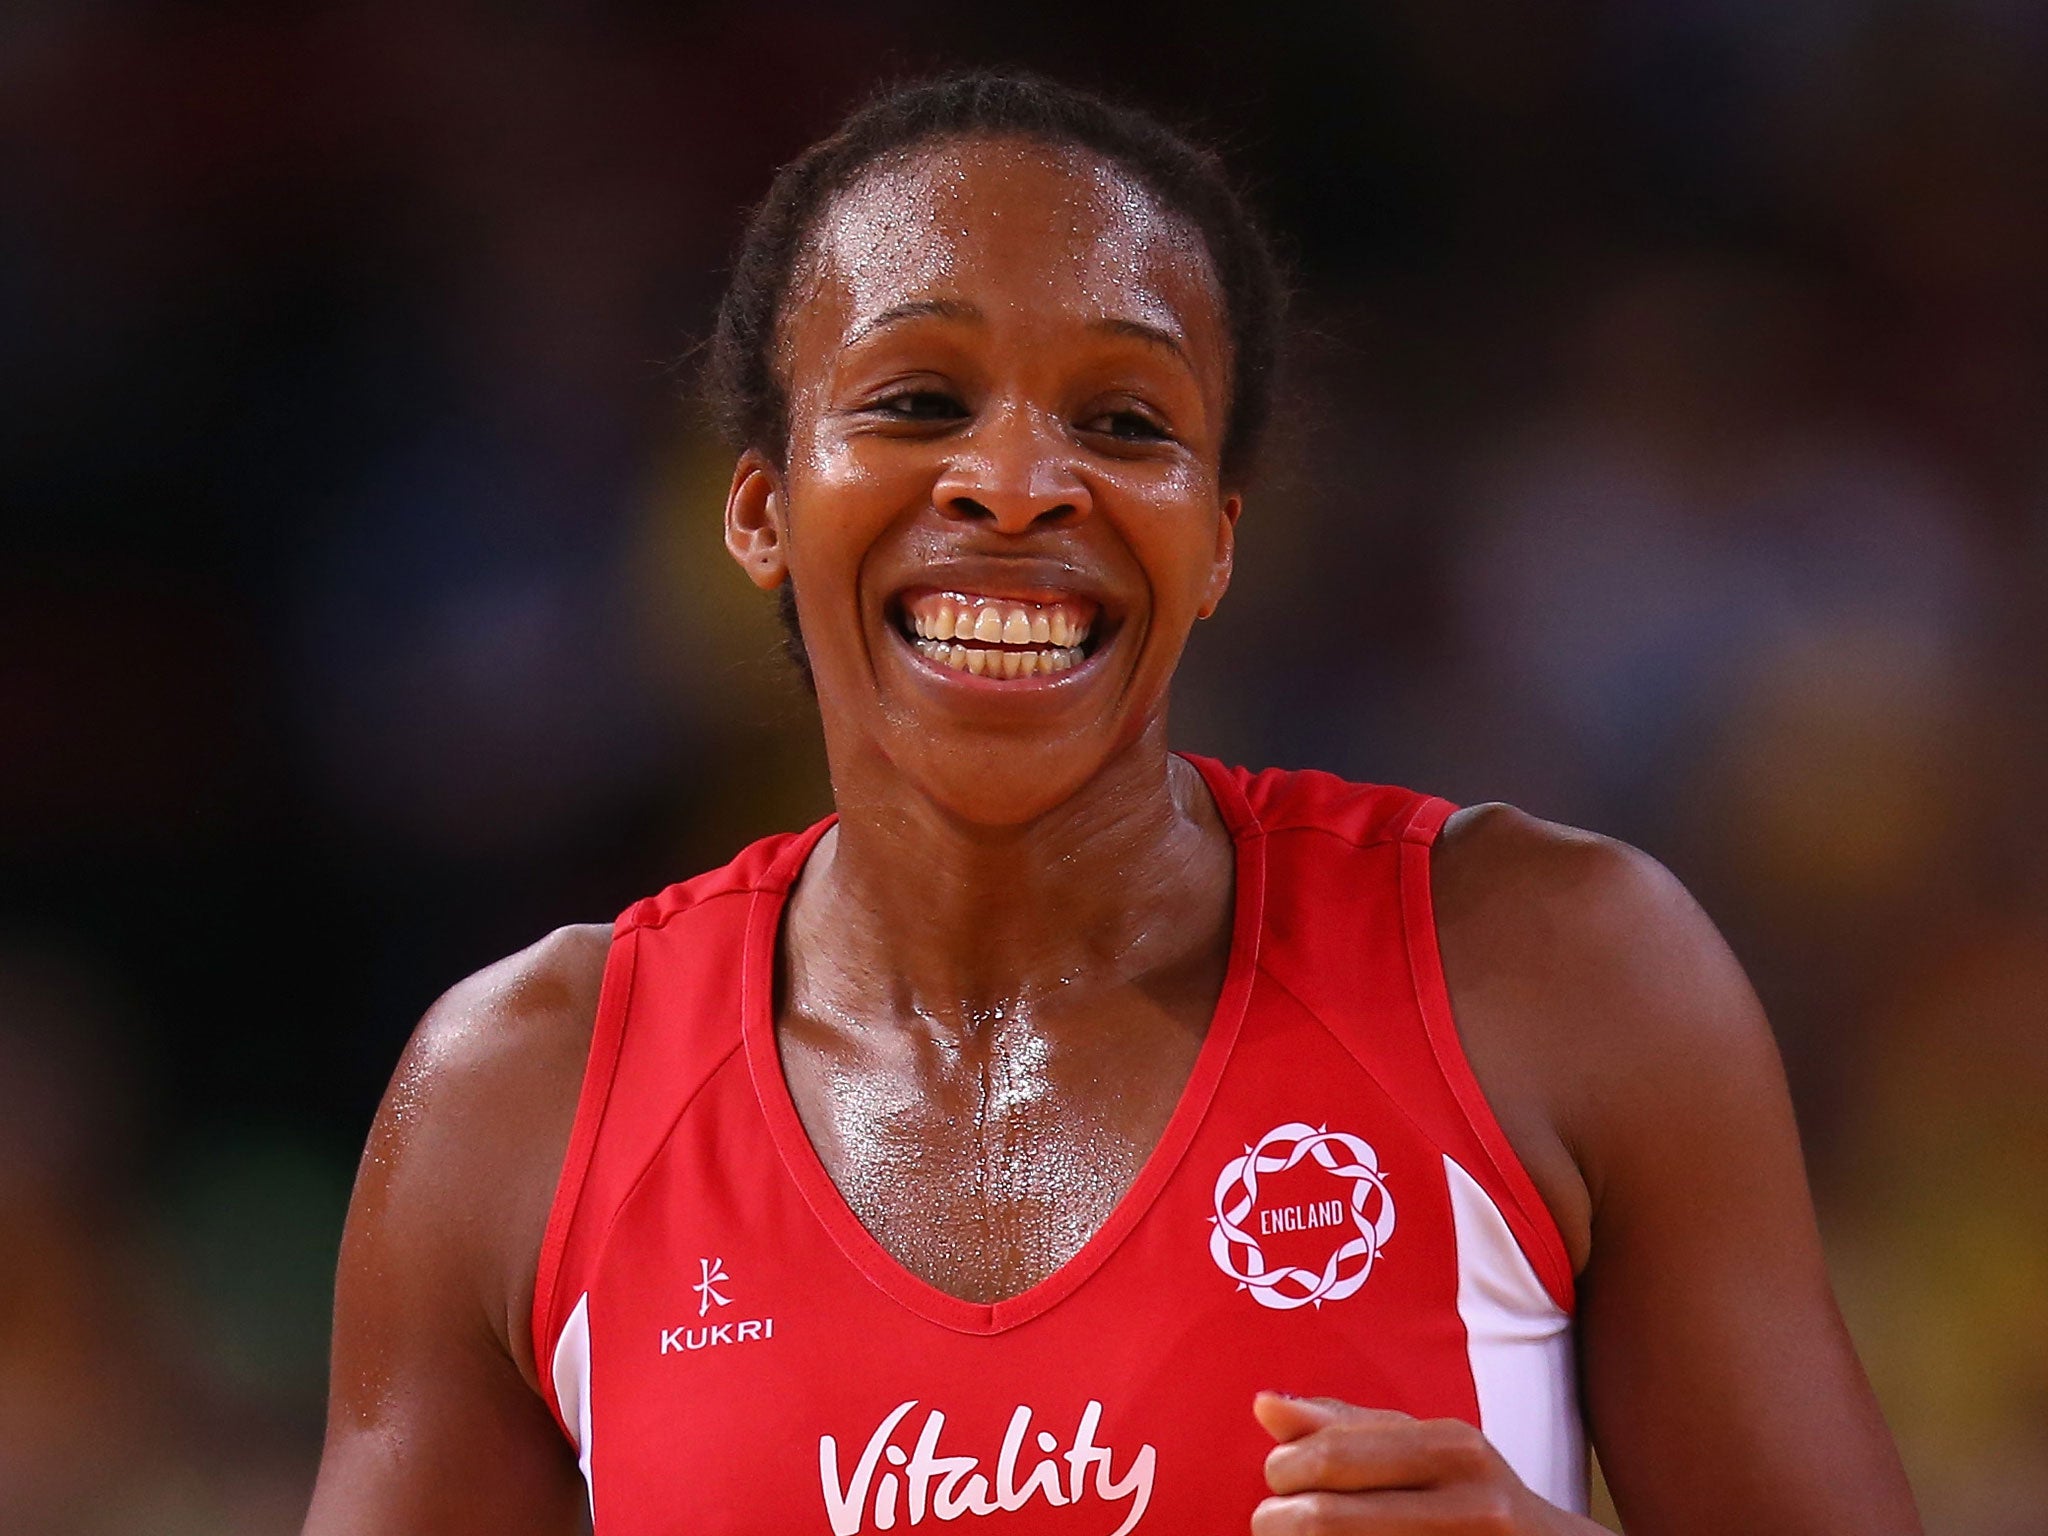 Former England captain Pamela Cookey is excited by the changes taking place in netball here